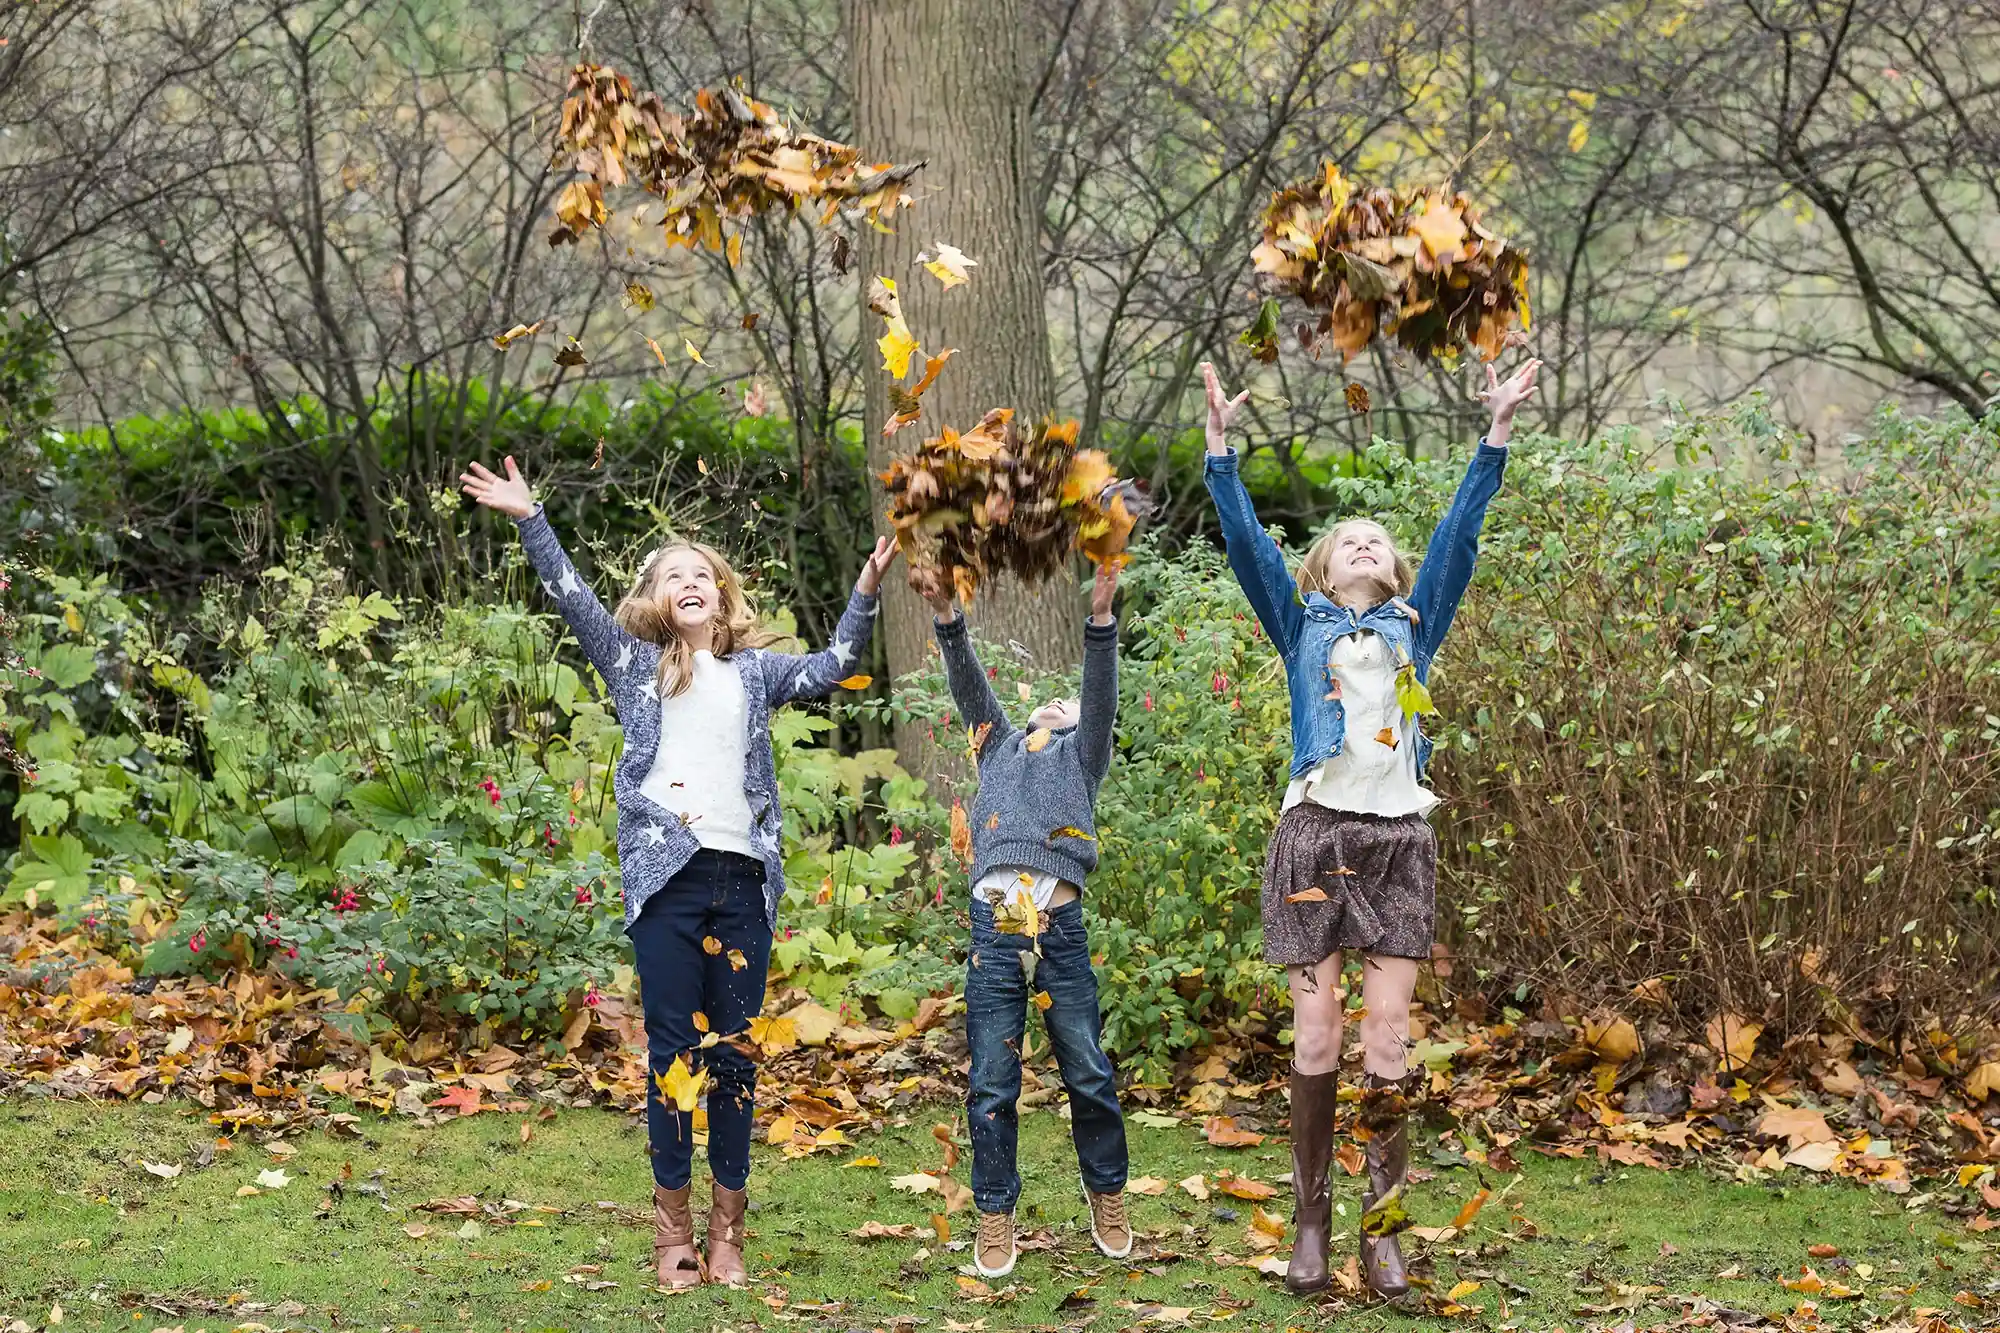 Three children are playing outdoors, tossing autumn leaves into the air. Trees and bushes form the background.